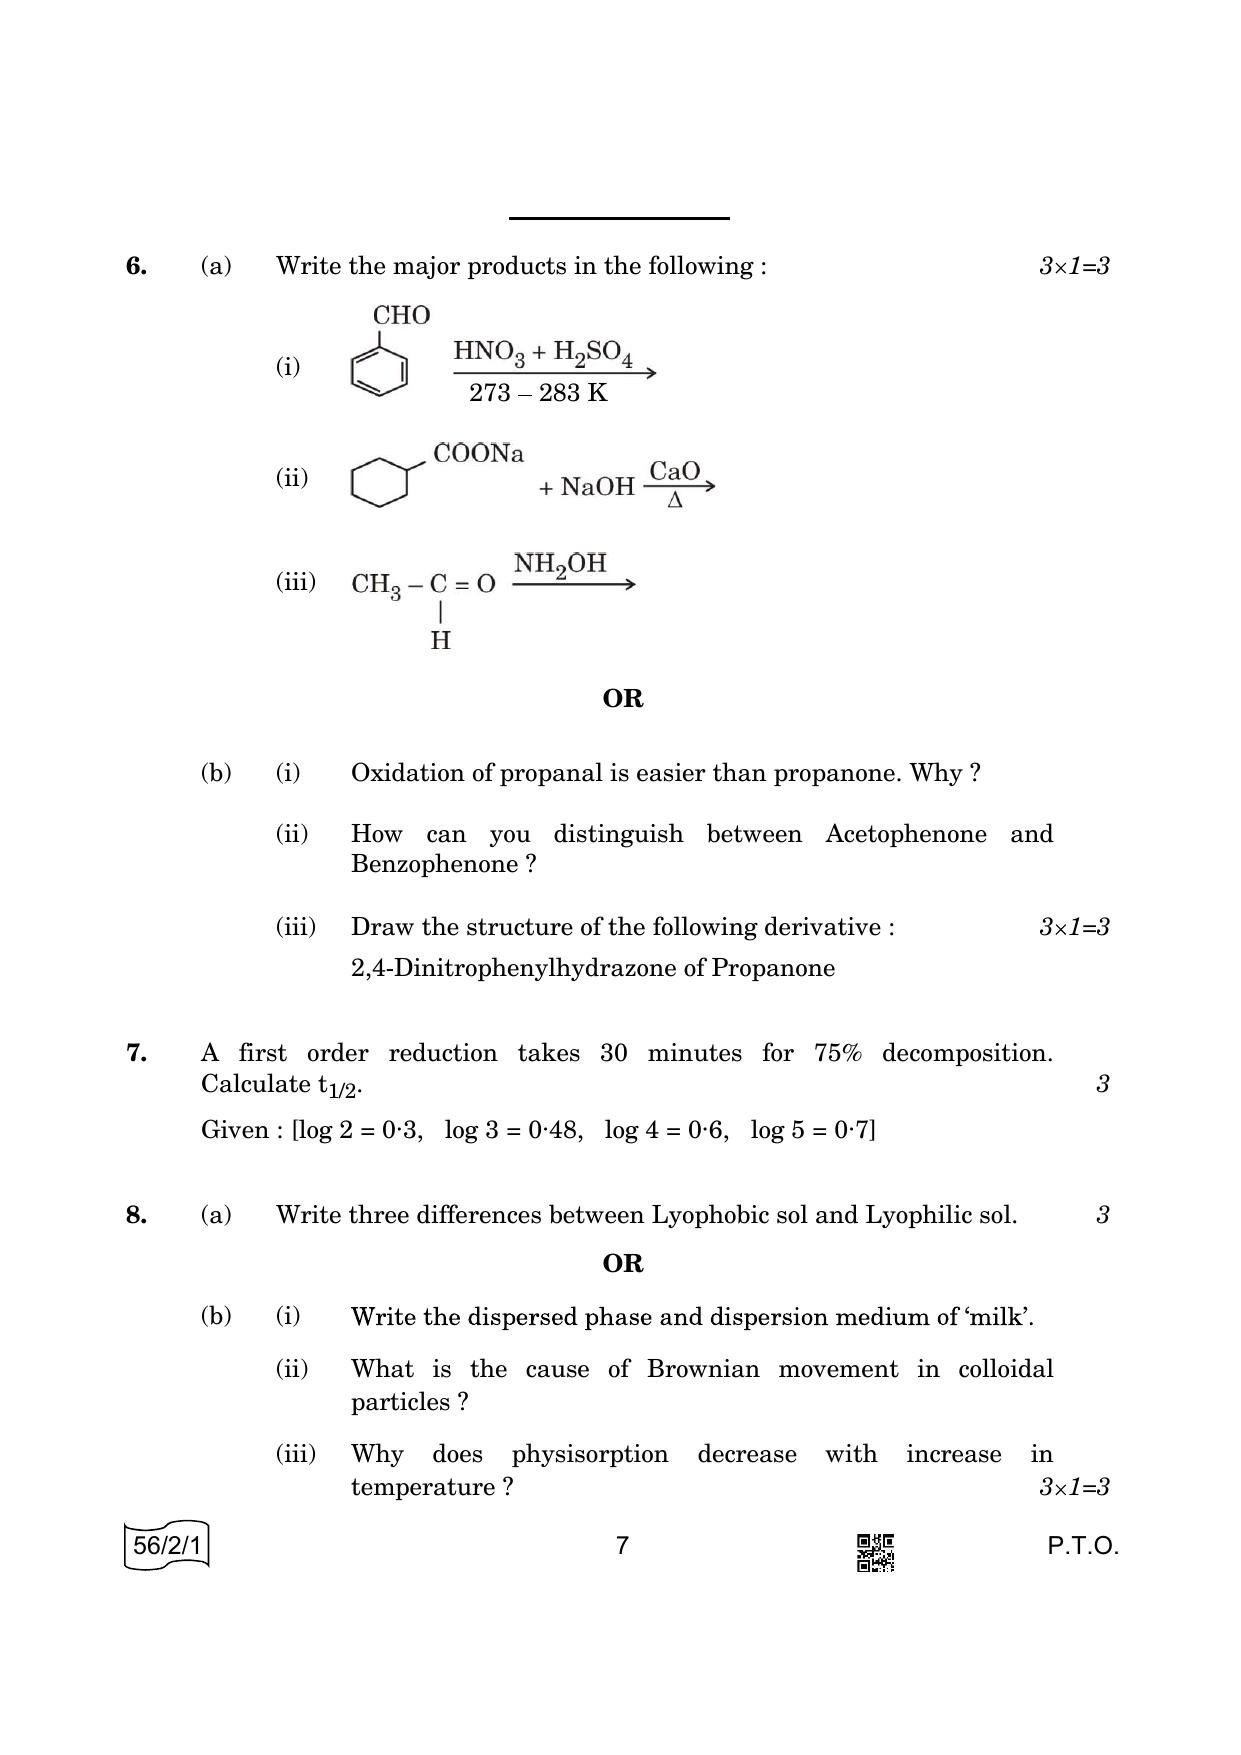 CBSE Class 12 56-2-1 Chemistry 2022 Question Paper - Page 7